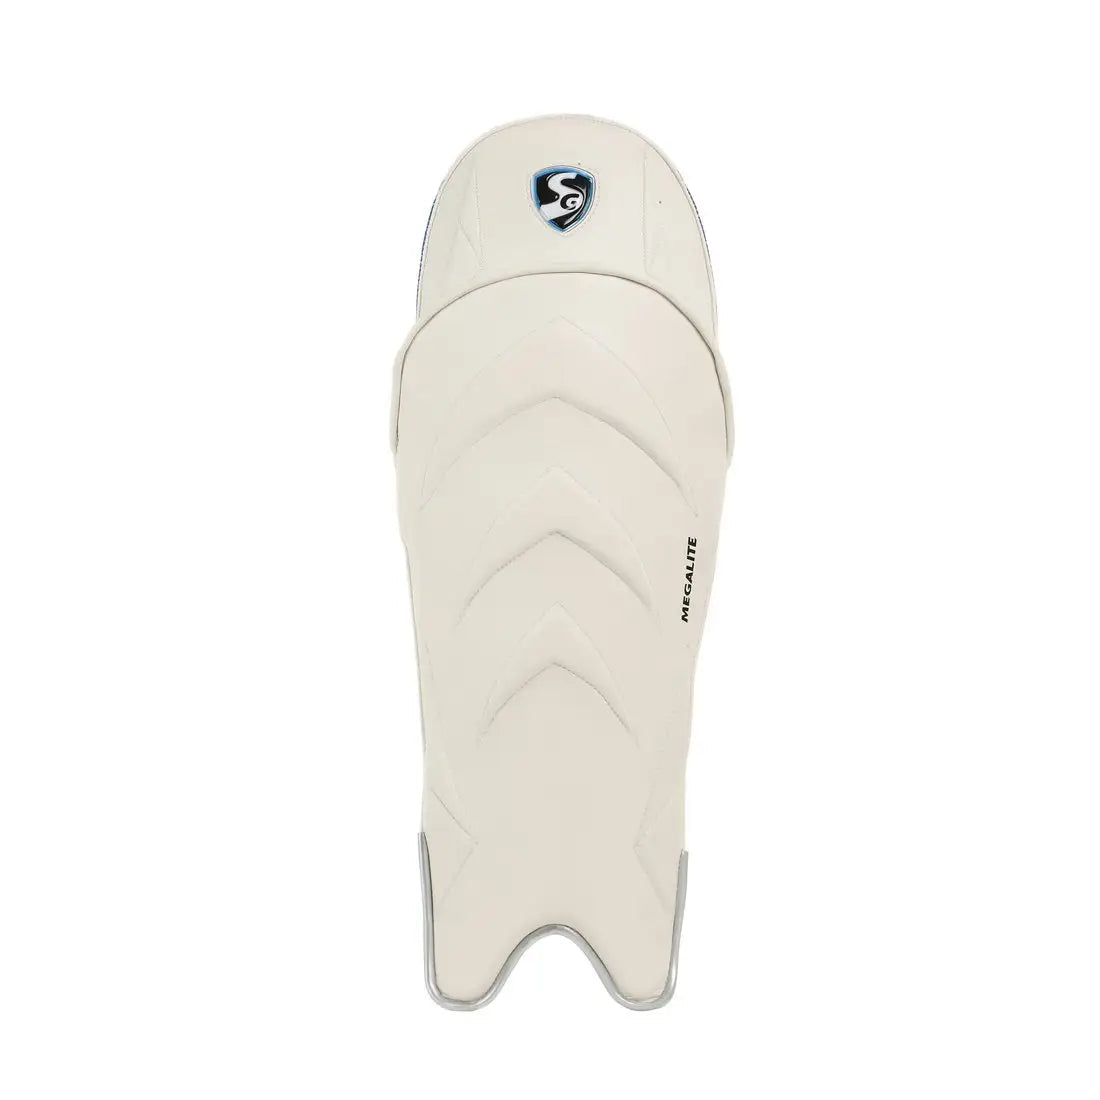 SG Megalite Cricket Wicket Keeper Pads Legguard Keeping - Men - PADS - WICKET KEEPING